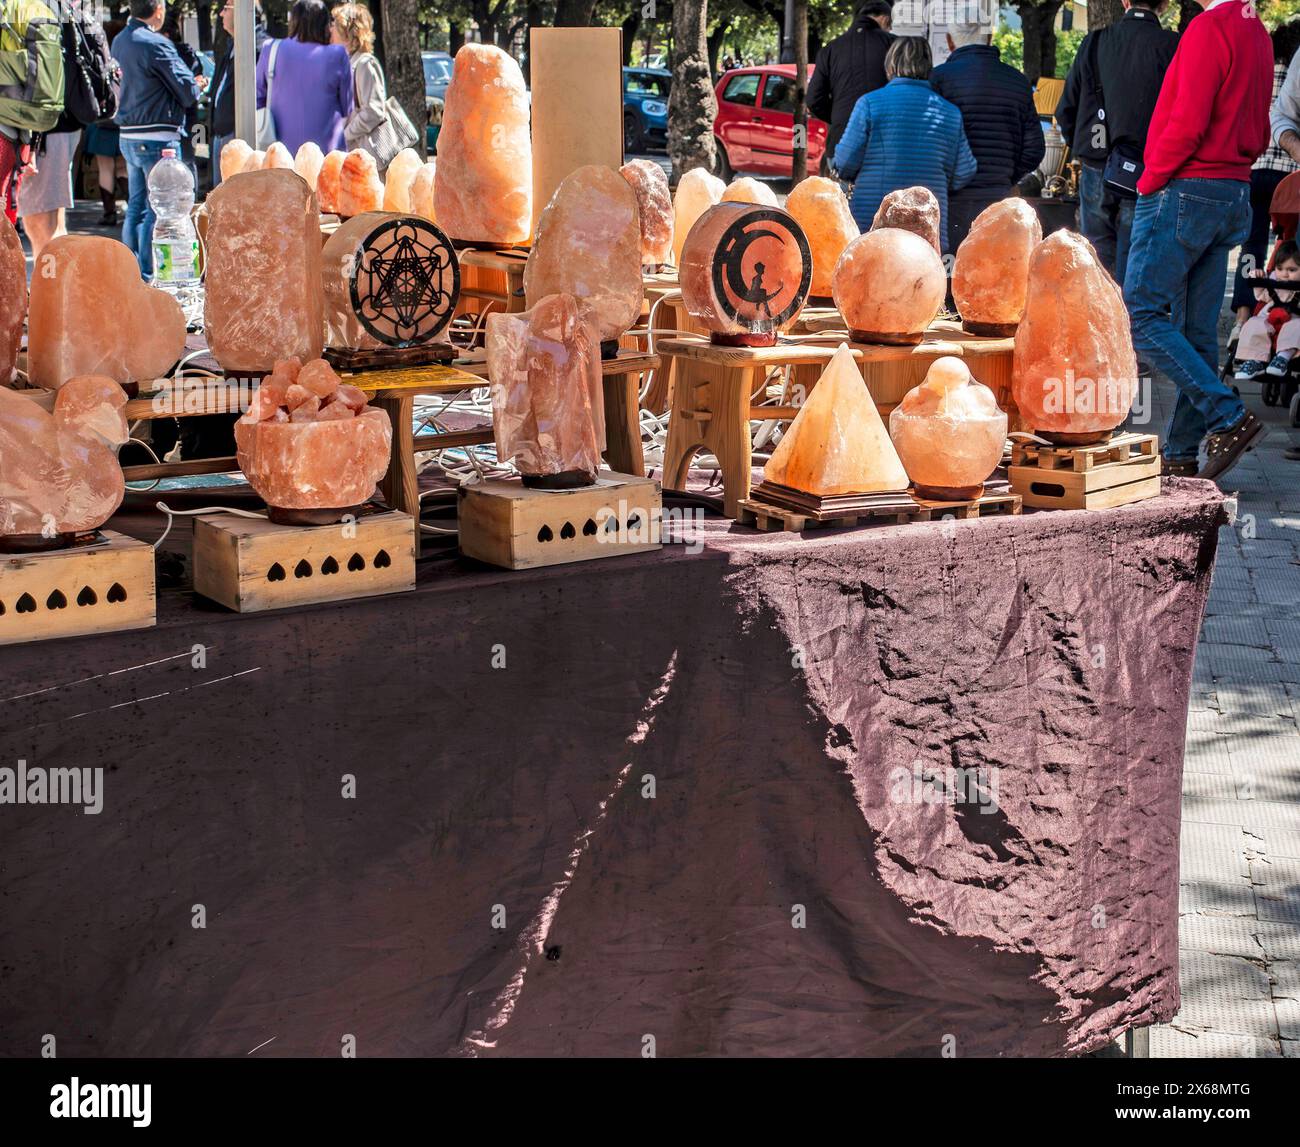 Outdoor Market Stall Displaying an Array of Himalayan Salt Lamps in Trani, Italy Stock Photo